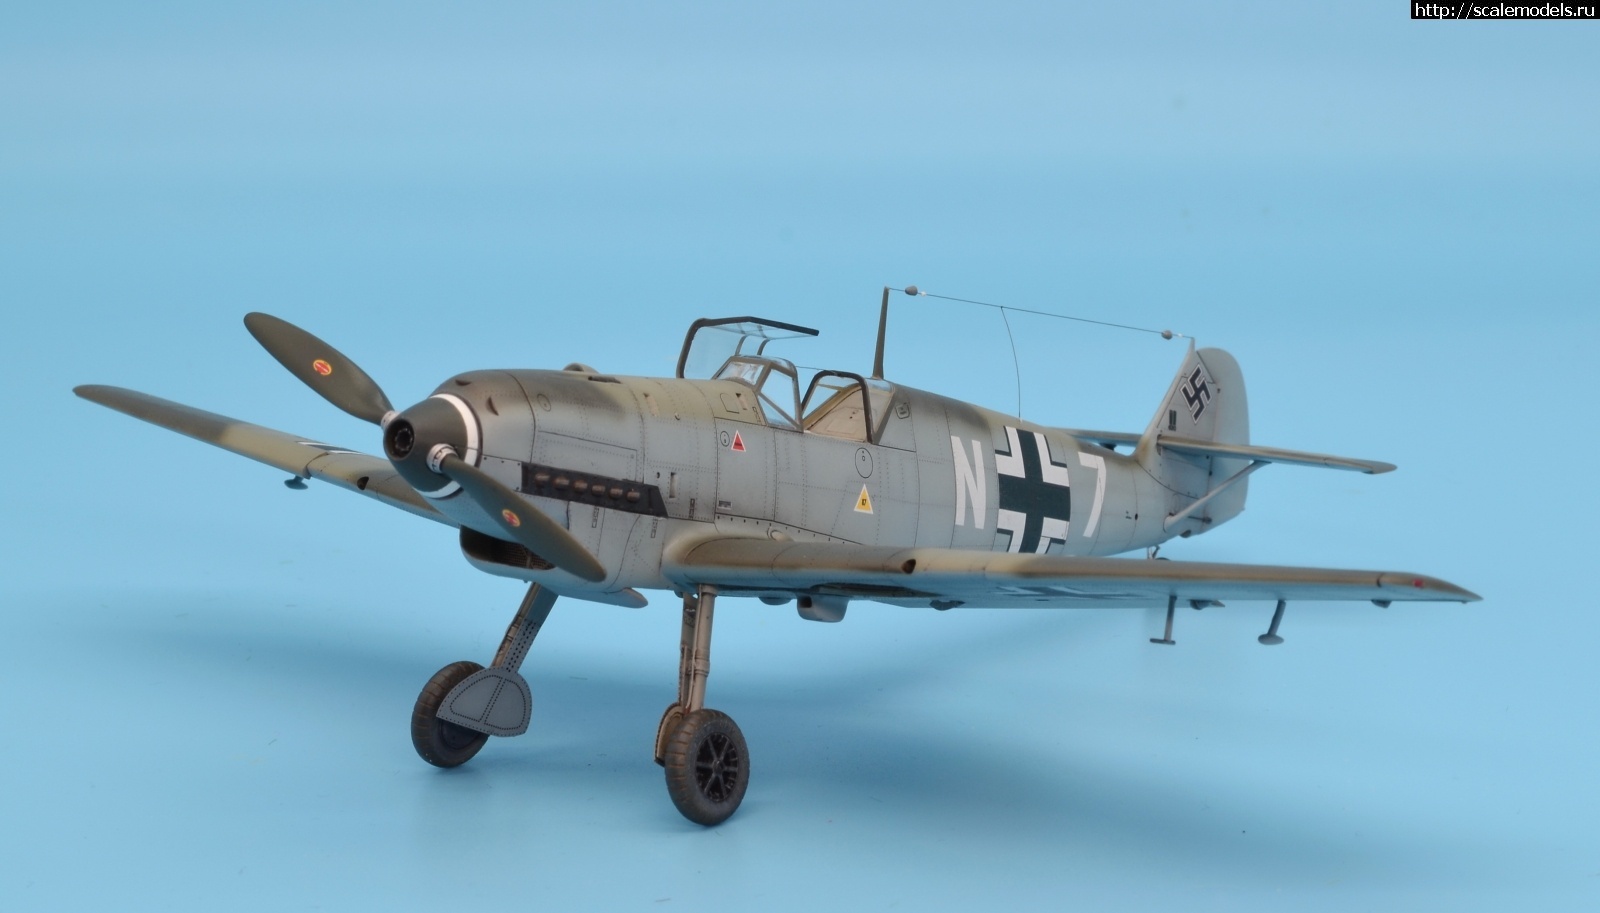  1/48 Bf-109      